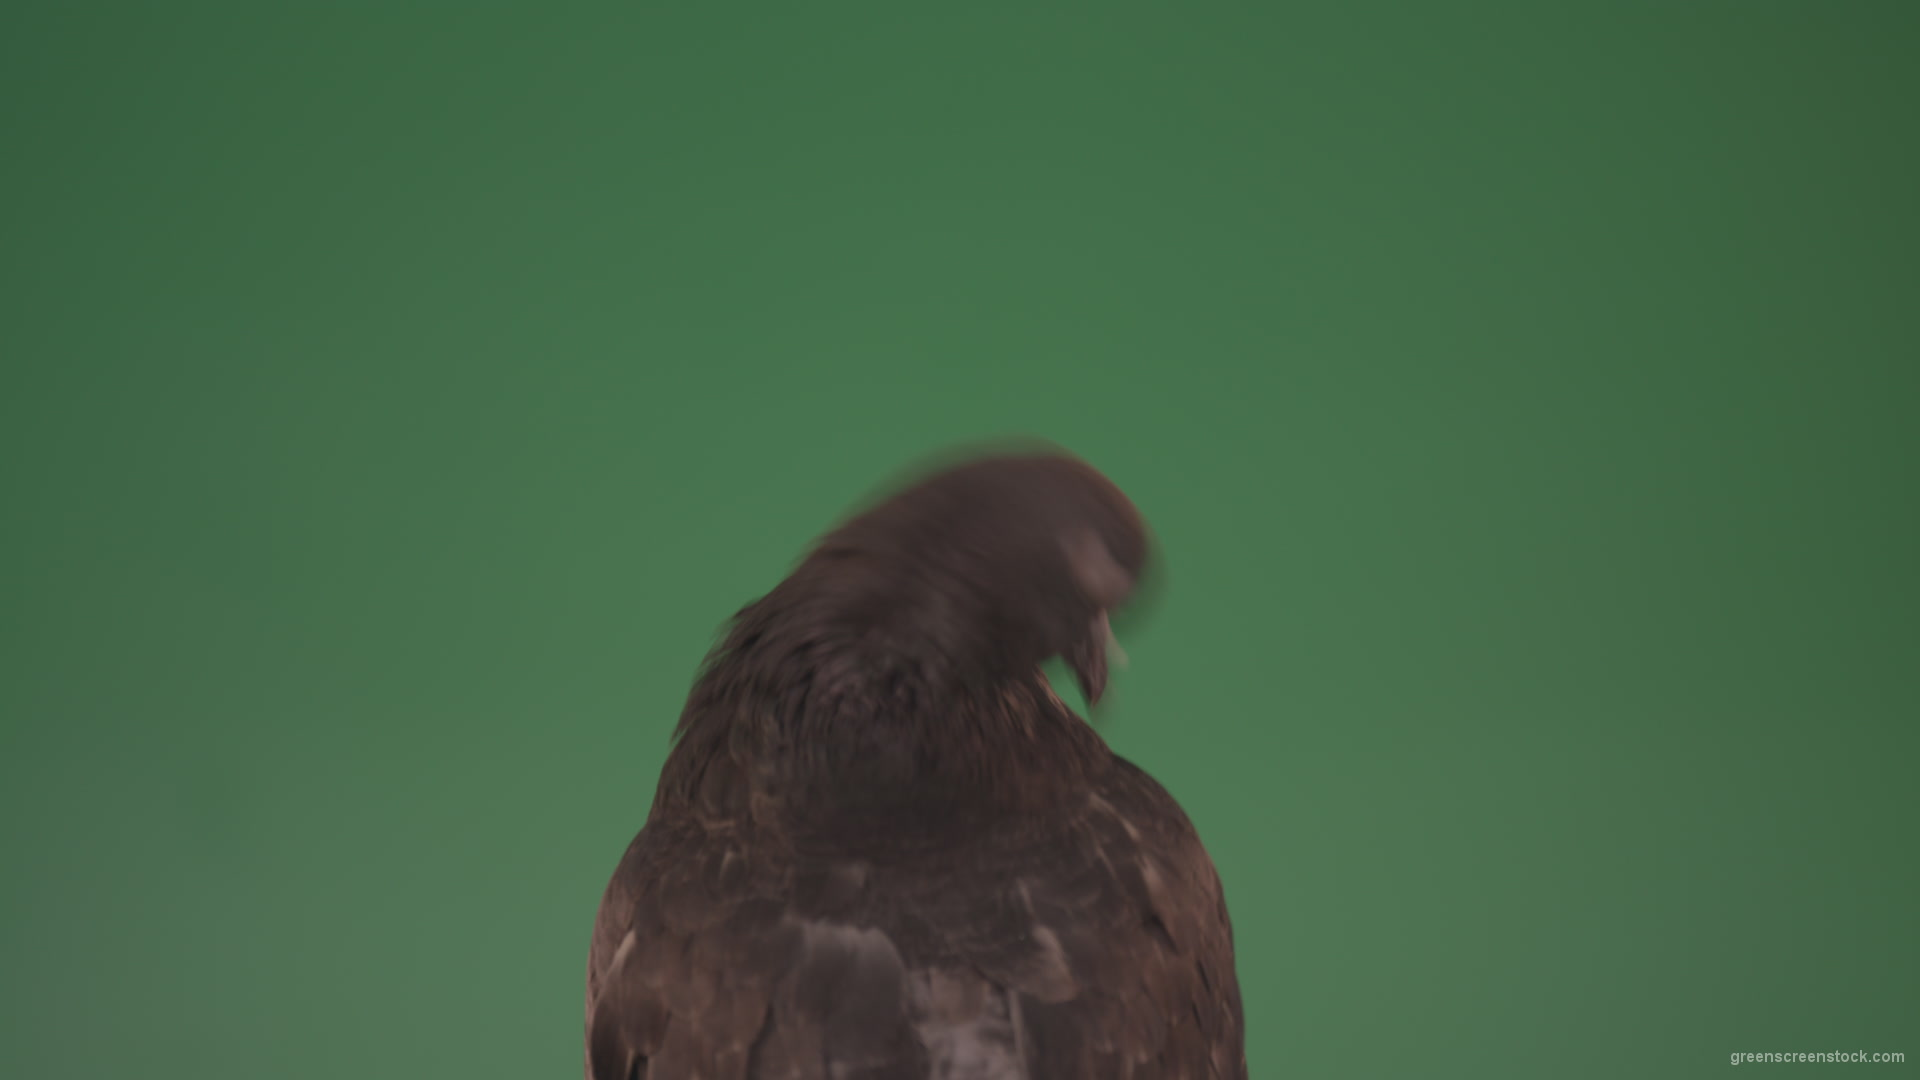 Sitting-wings-to-the-chicken-bird-home-pigeon-isolated-on-chromakey-background_004 Green Screen Stock